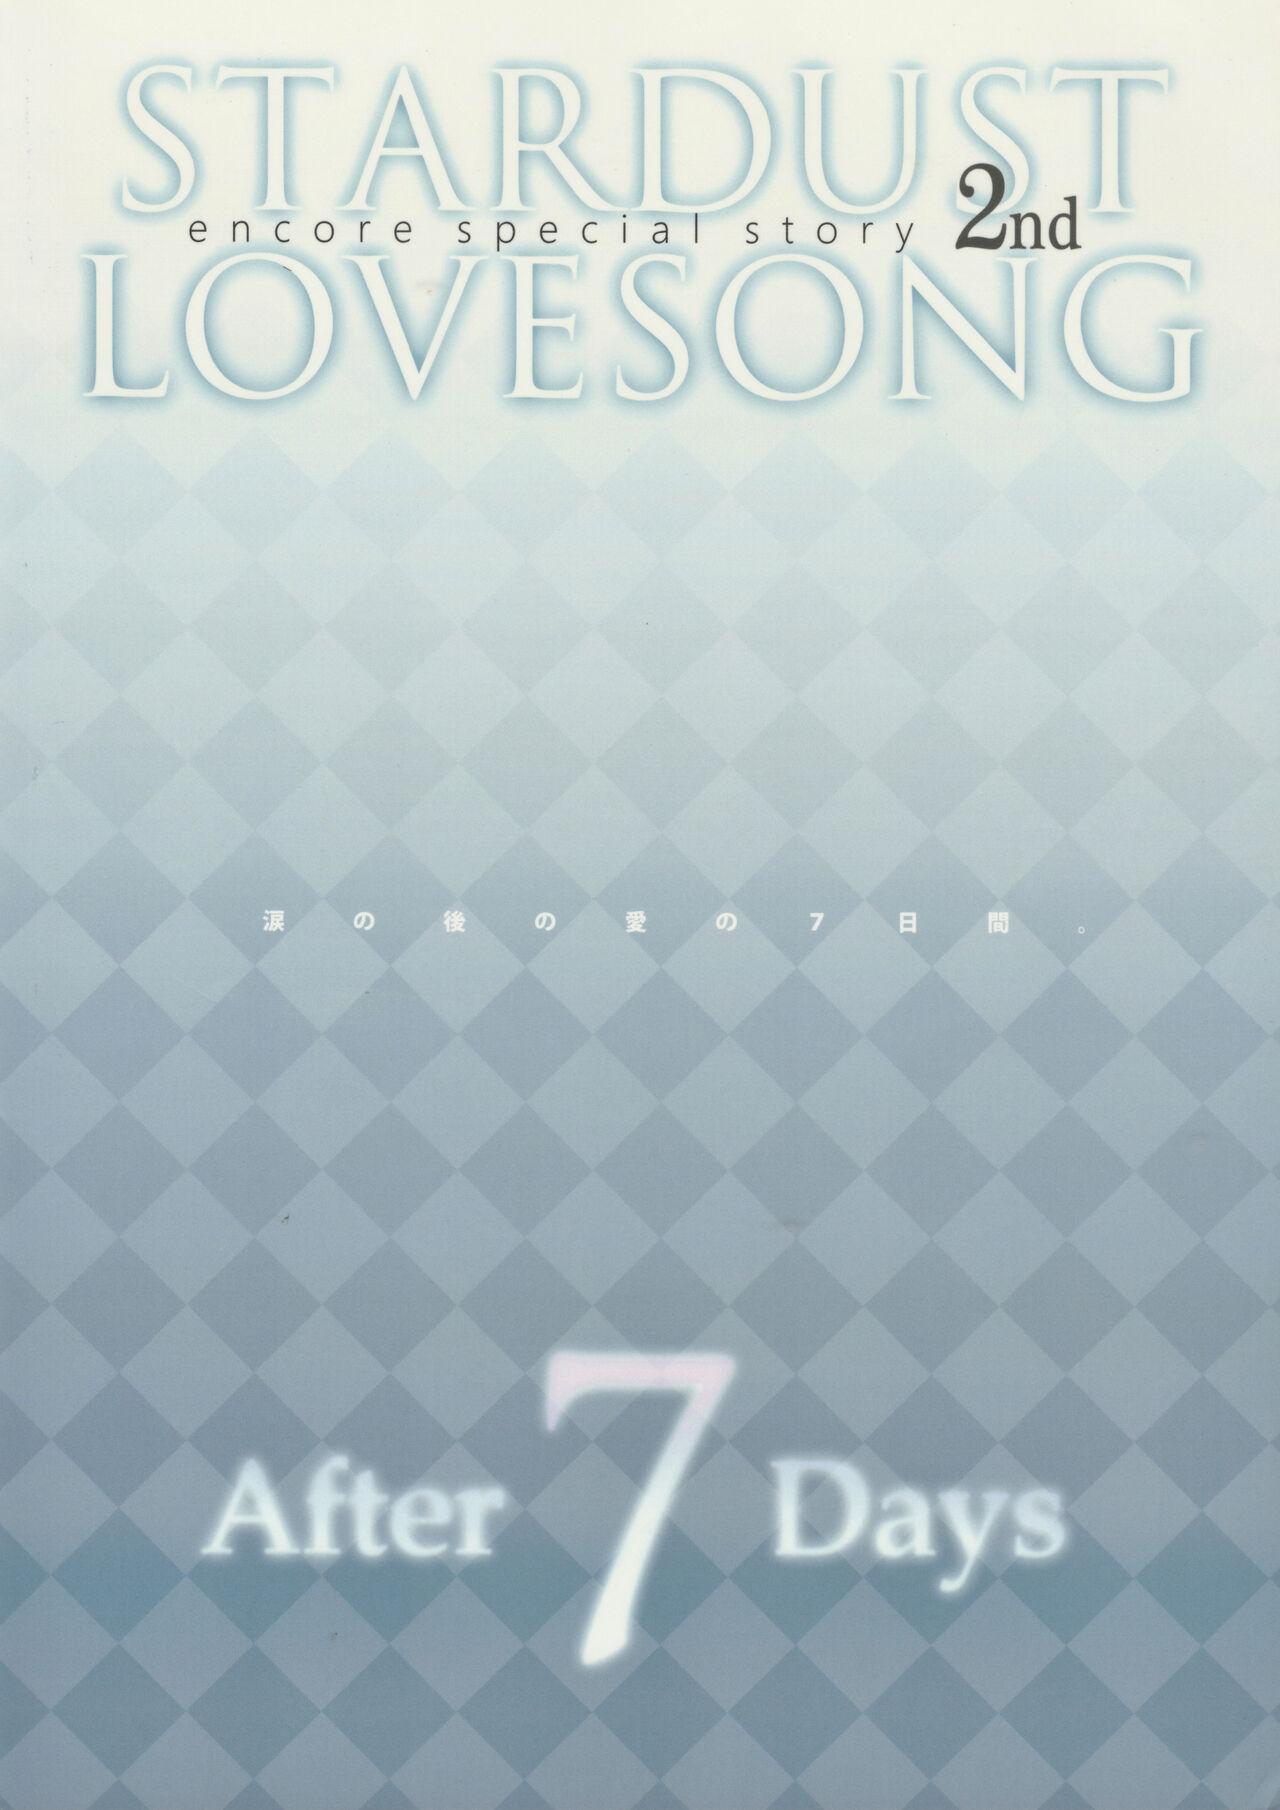 STARDUST LOVESONG encore special story 2nd After 7 Days 45